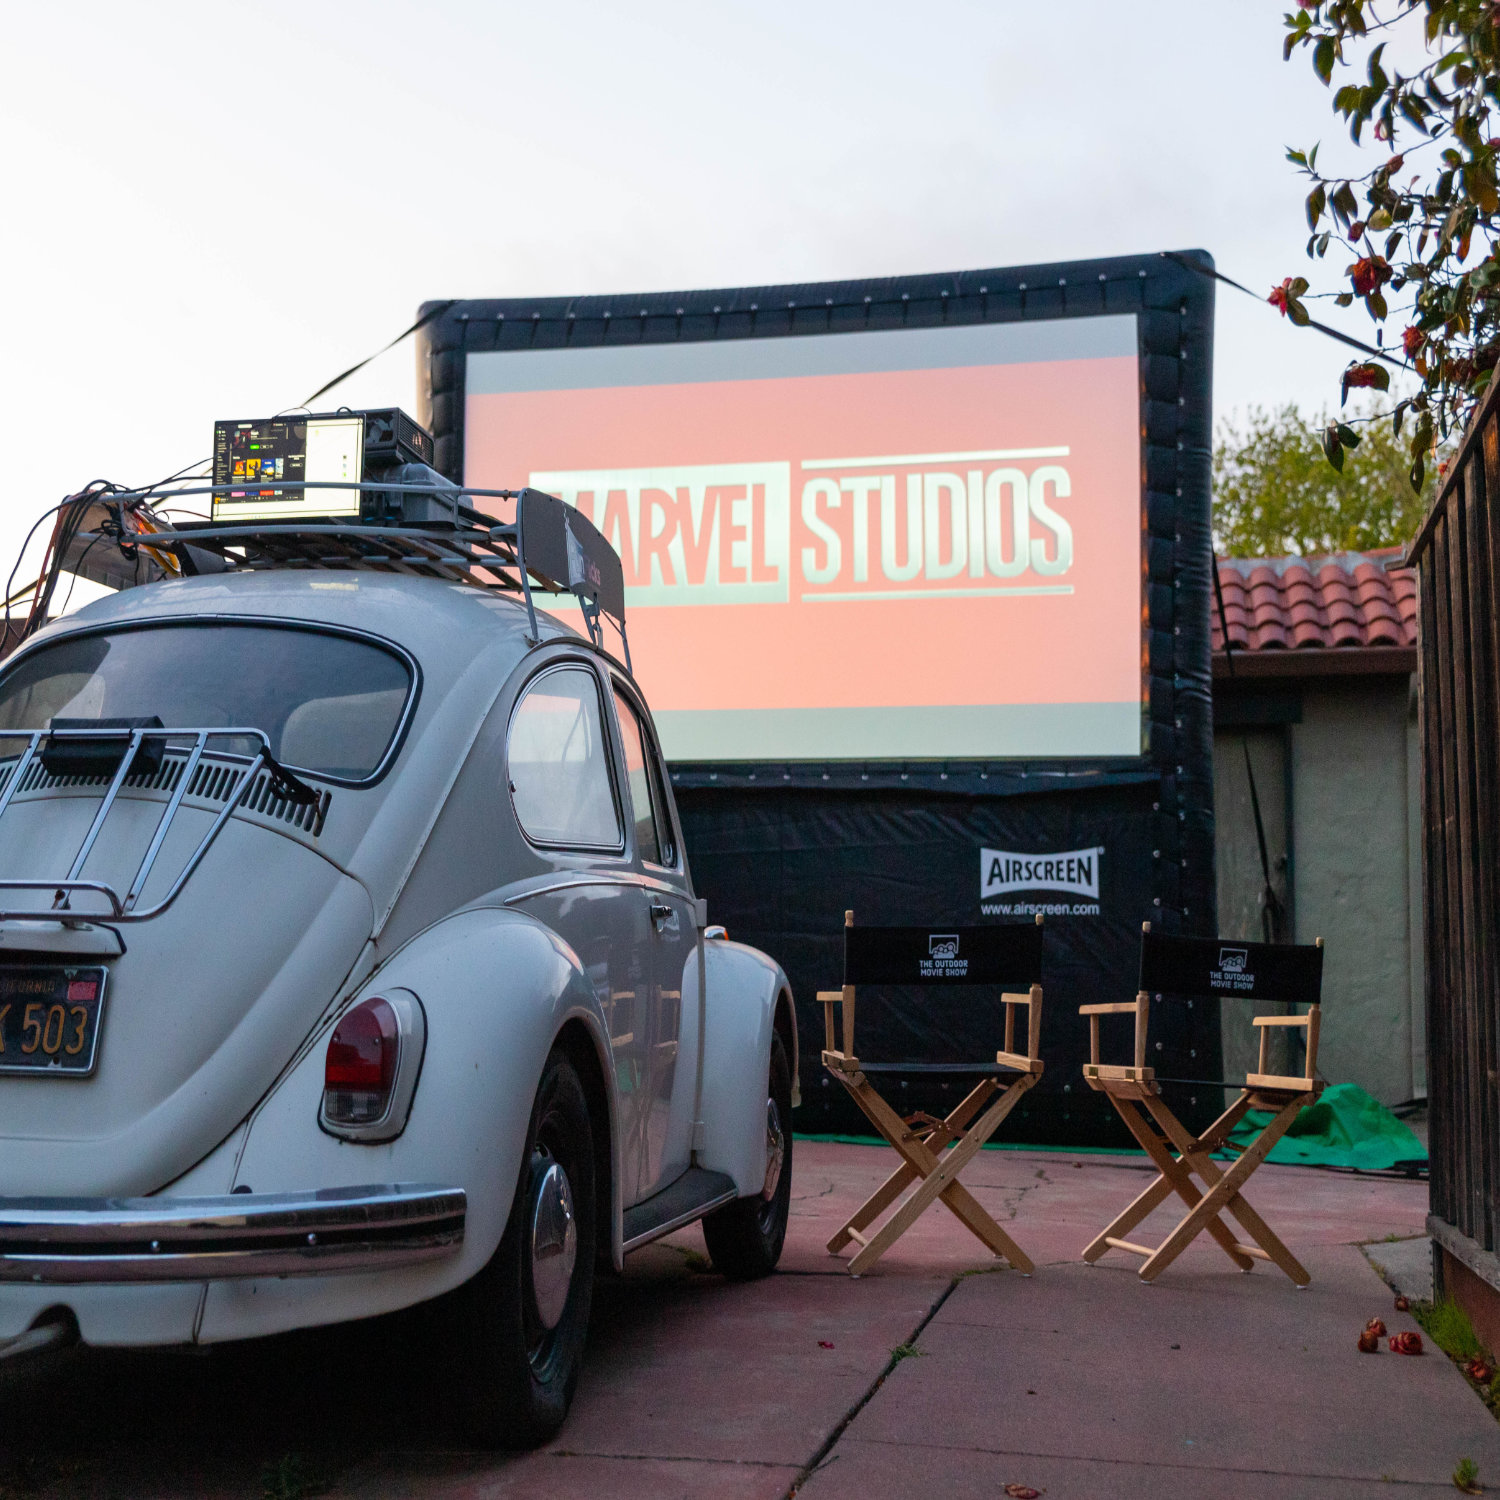 A private drive-in movie with a small movie theater screen in a backyard.